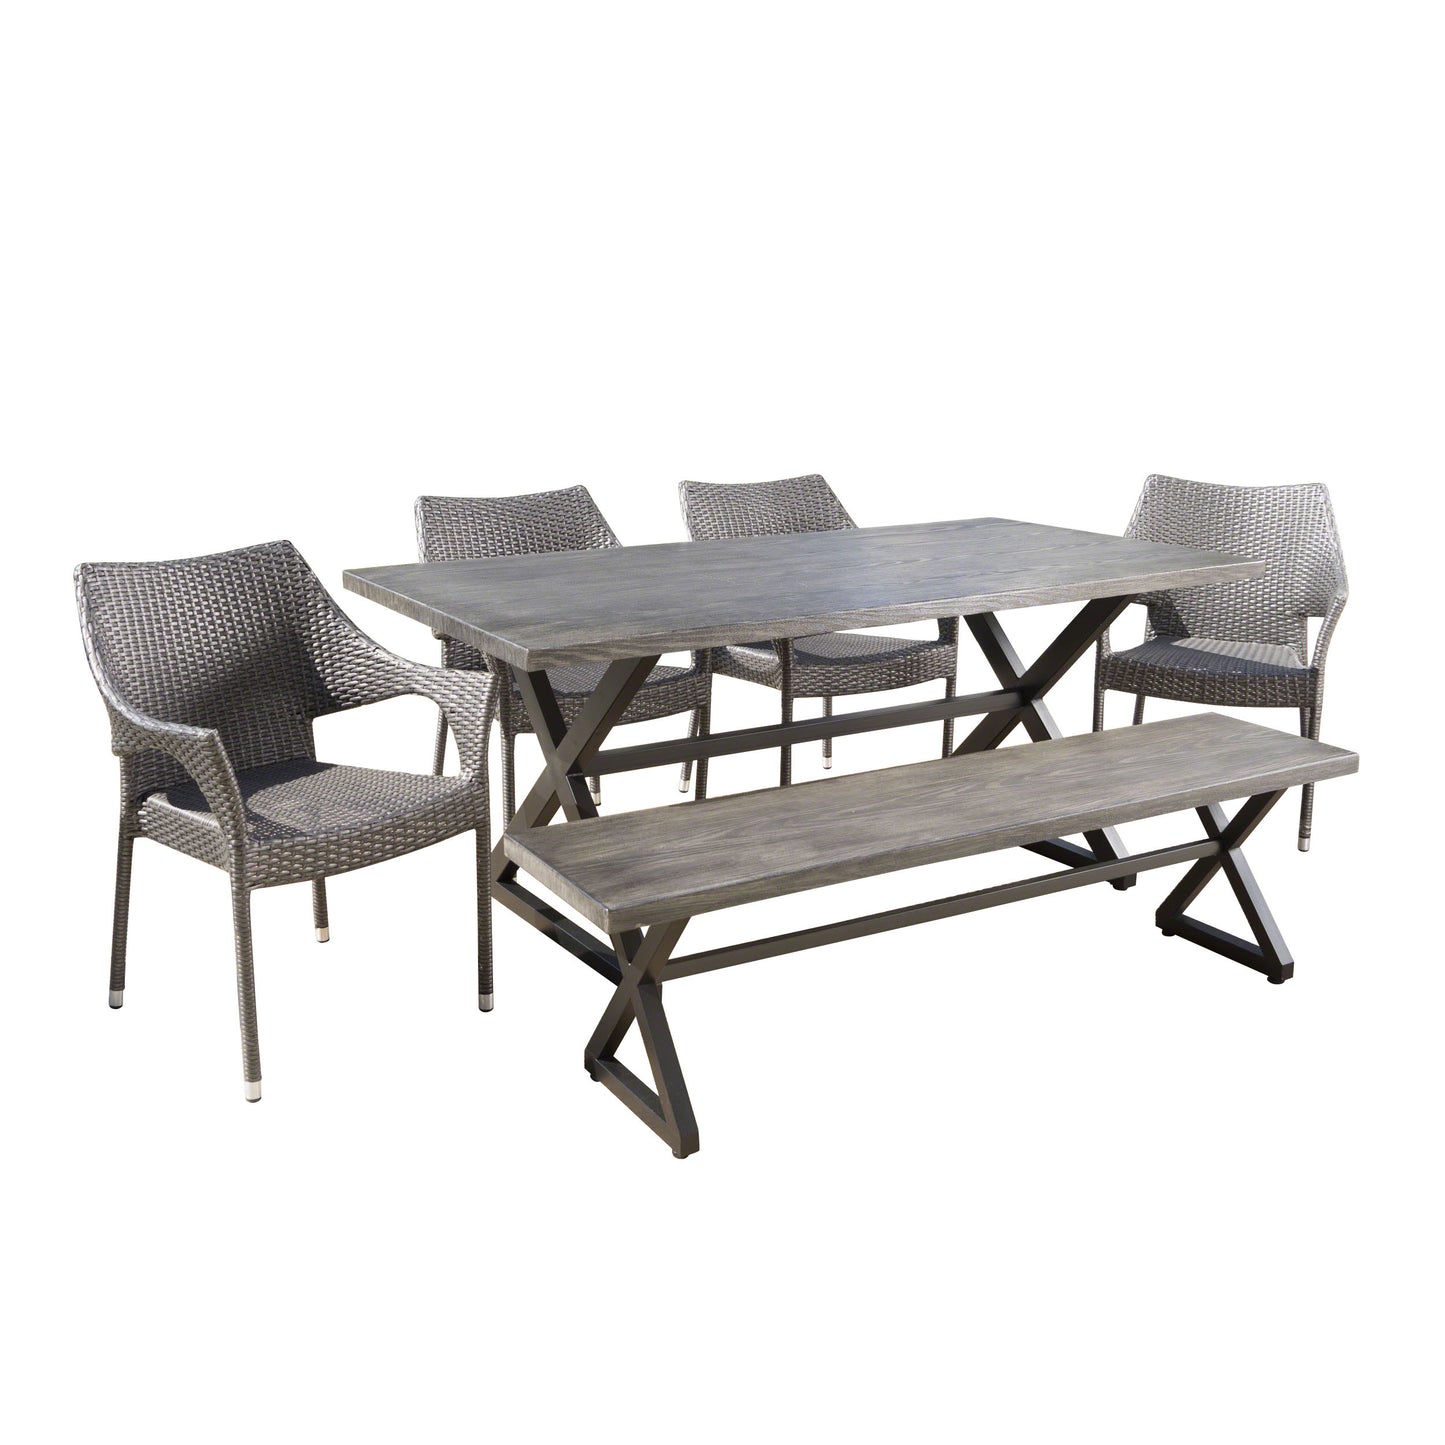 Ismus Outdoor 6 Piece Aluminum Dining Set with Bench and Stacking Chairs